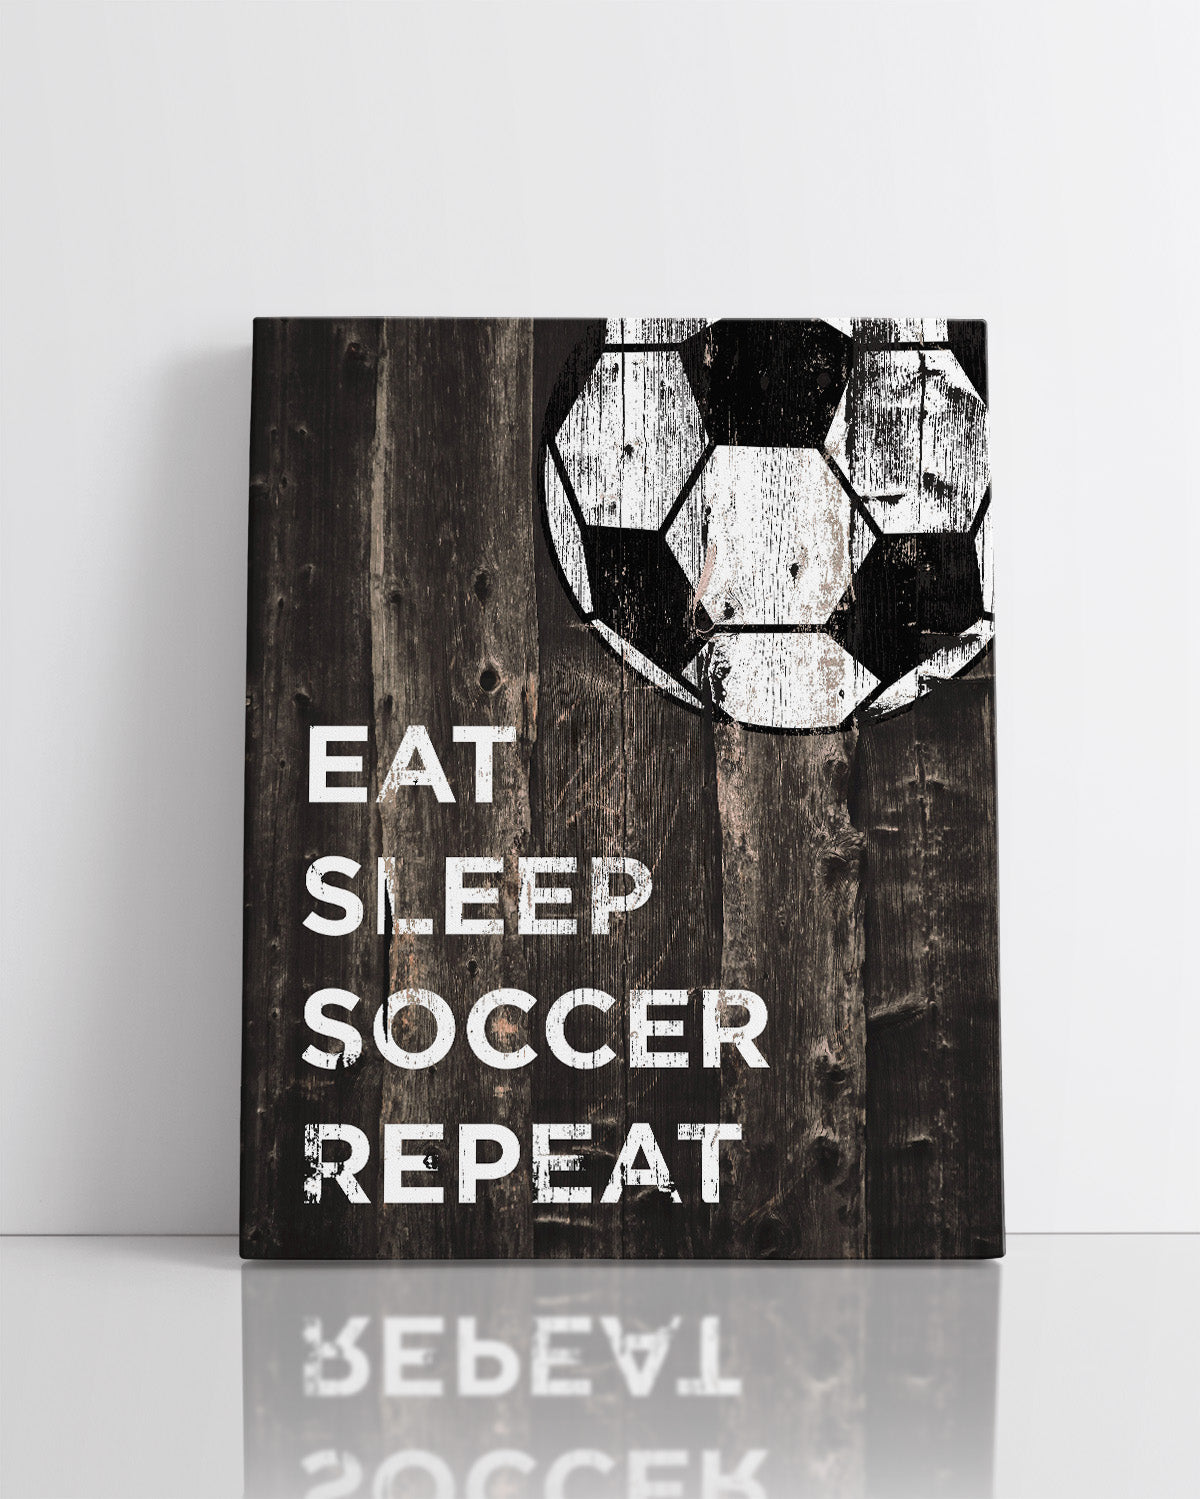 Eat Sleep Soccer Repeat room decor - Sports wall decor for boys and girls - Kids sport bedroom decor - Soccer ball rustic wall art - Thoughtful gift for a coach